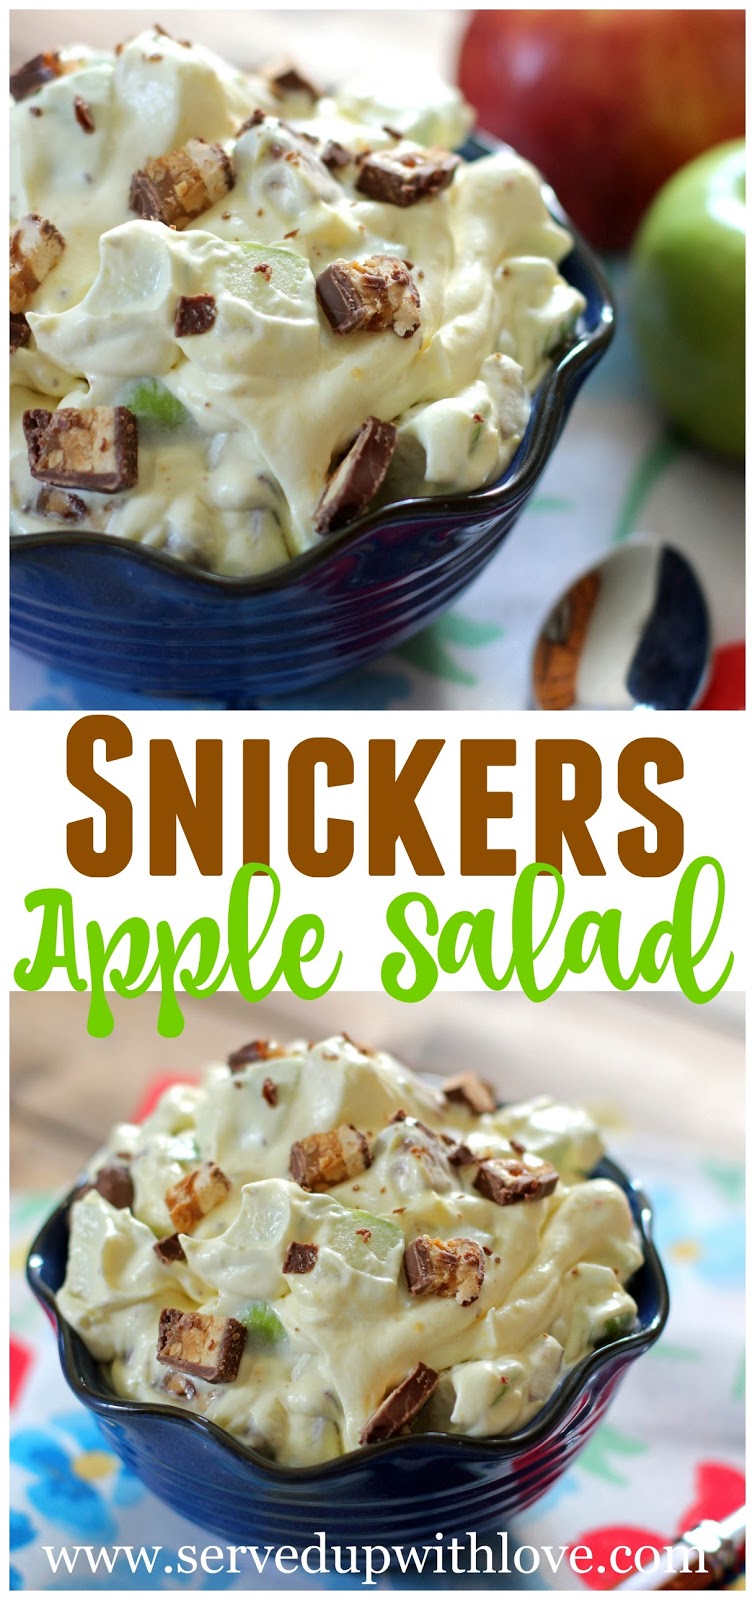 Served Up With Love: Snickers Apple Salad